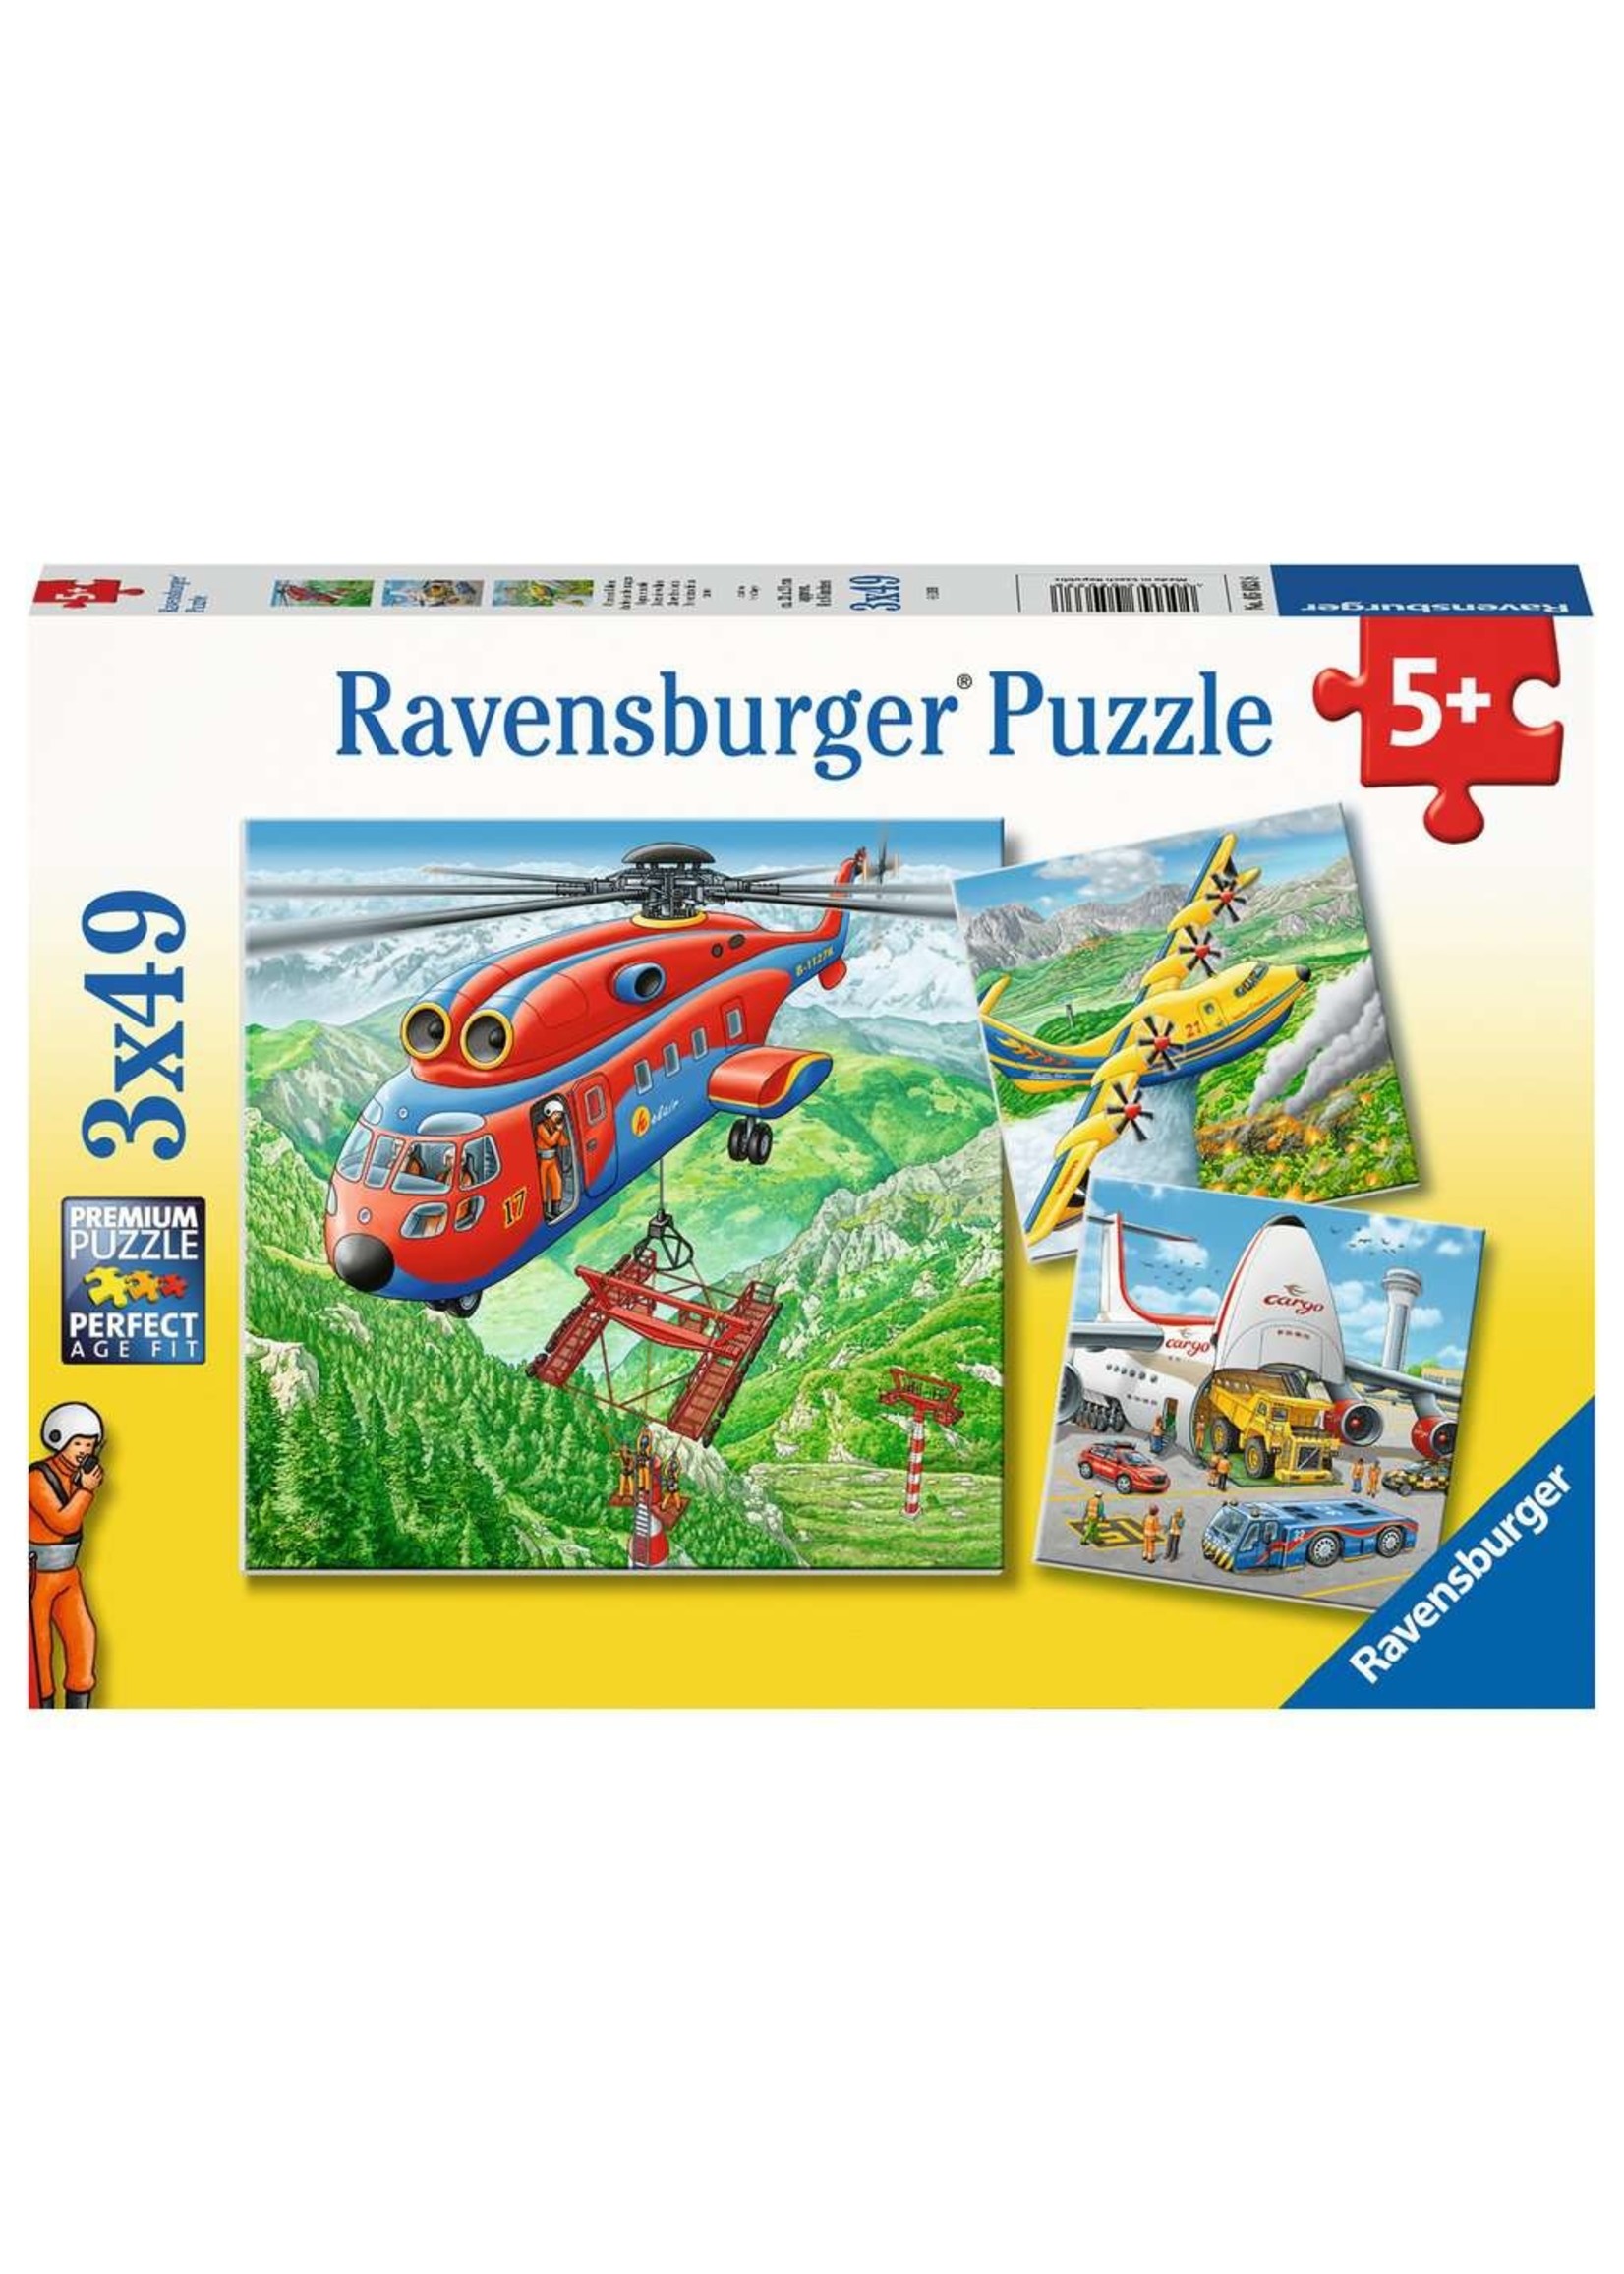 Ravensburger Above the Clouds - 49 Piece Puzzle (3 Pack)